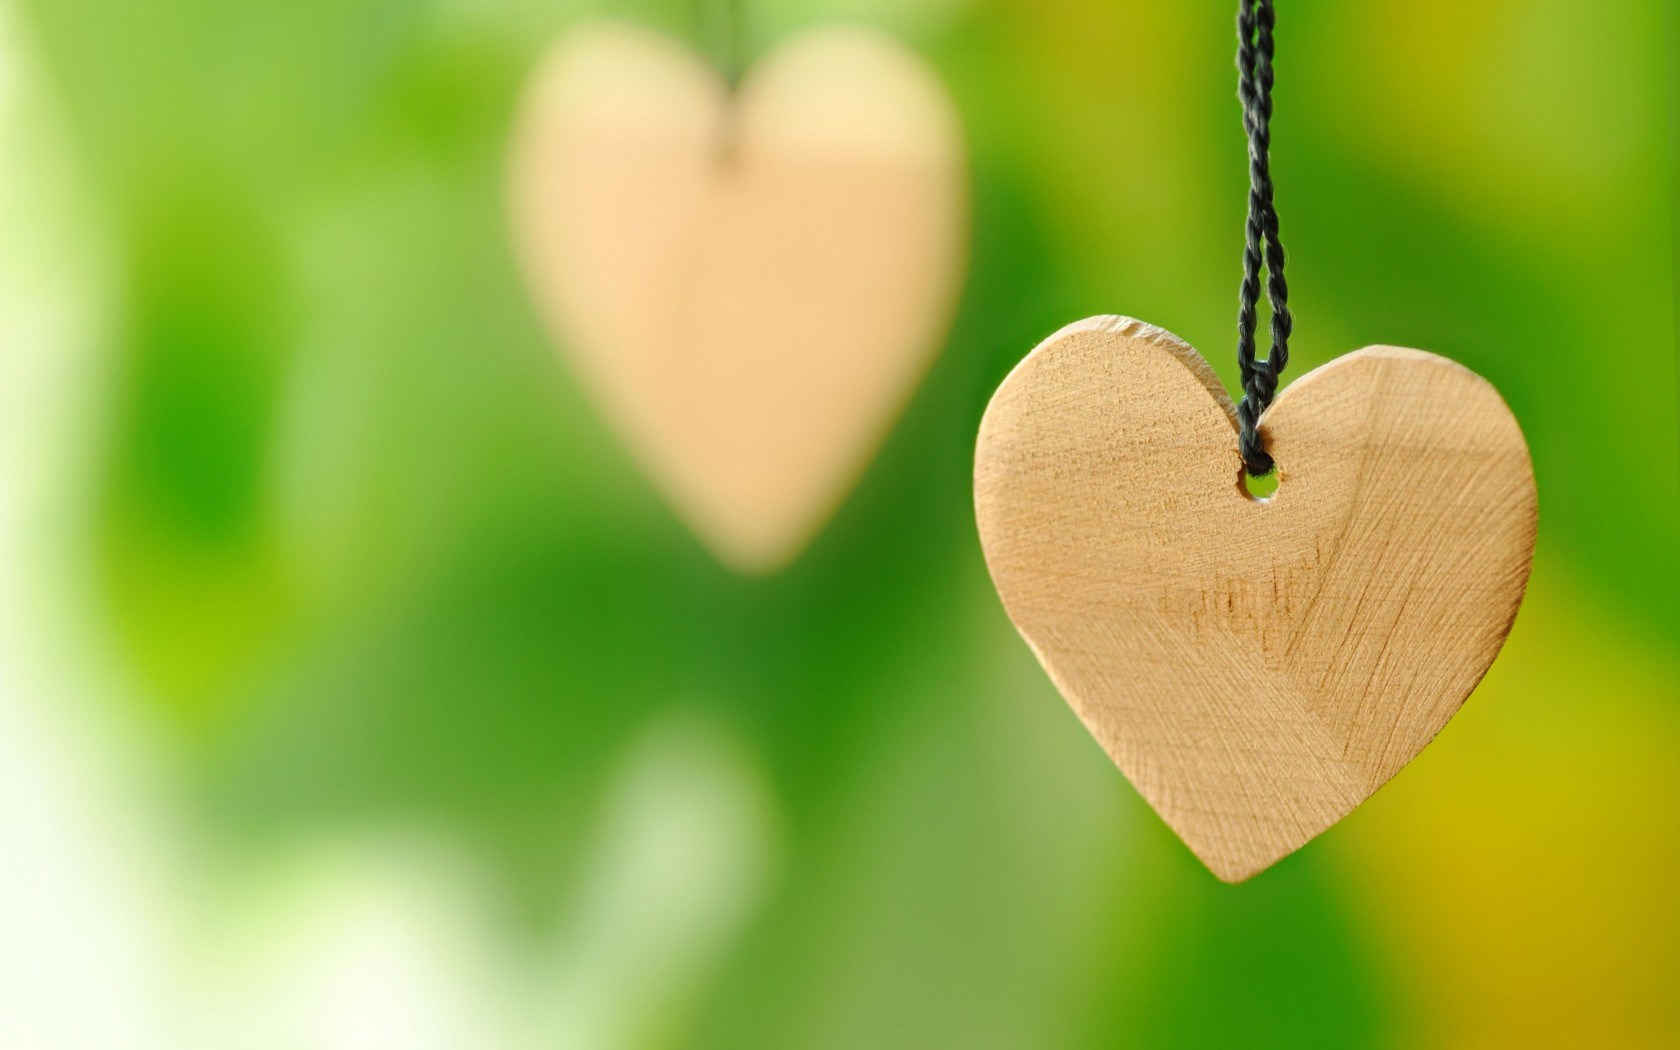 Heart Images In Wood - HD Wallpaper 